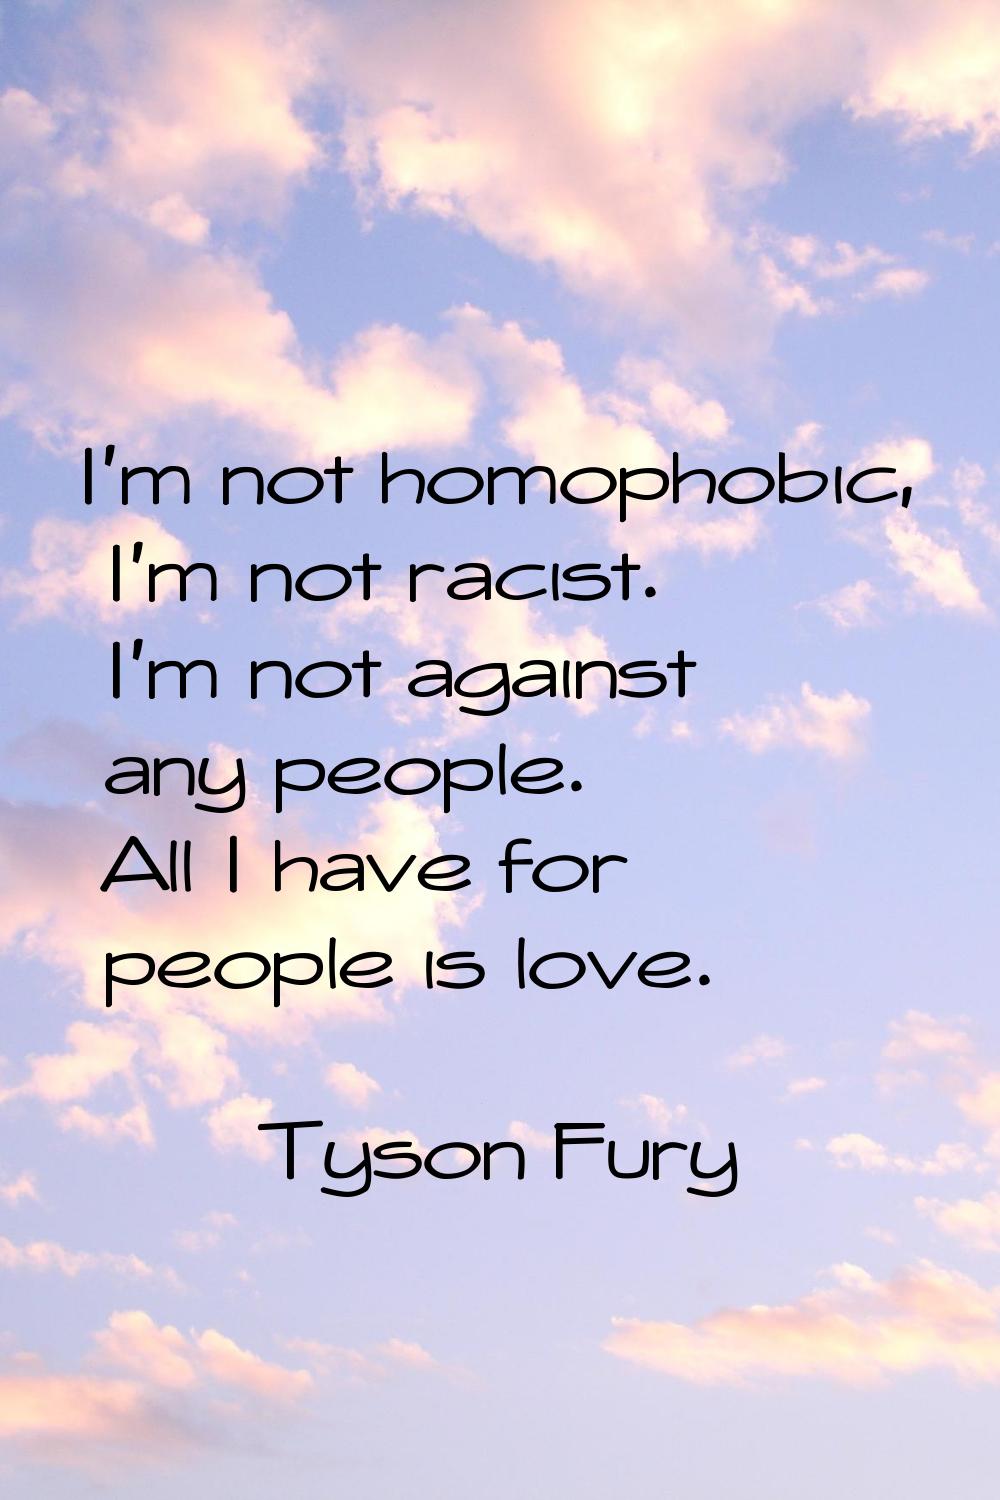 I'm not homophobic, I'm not racist. I'm not against any people. All I have for people is love.